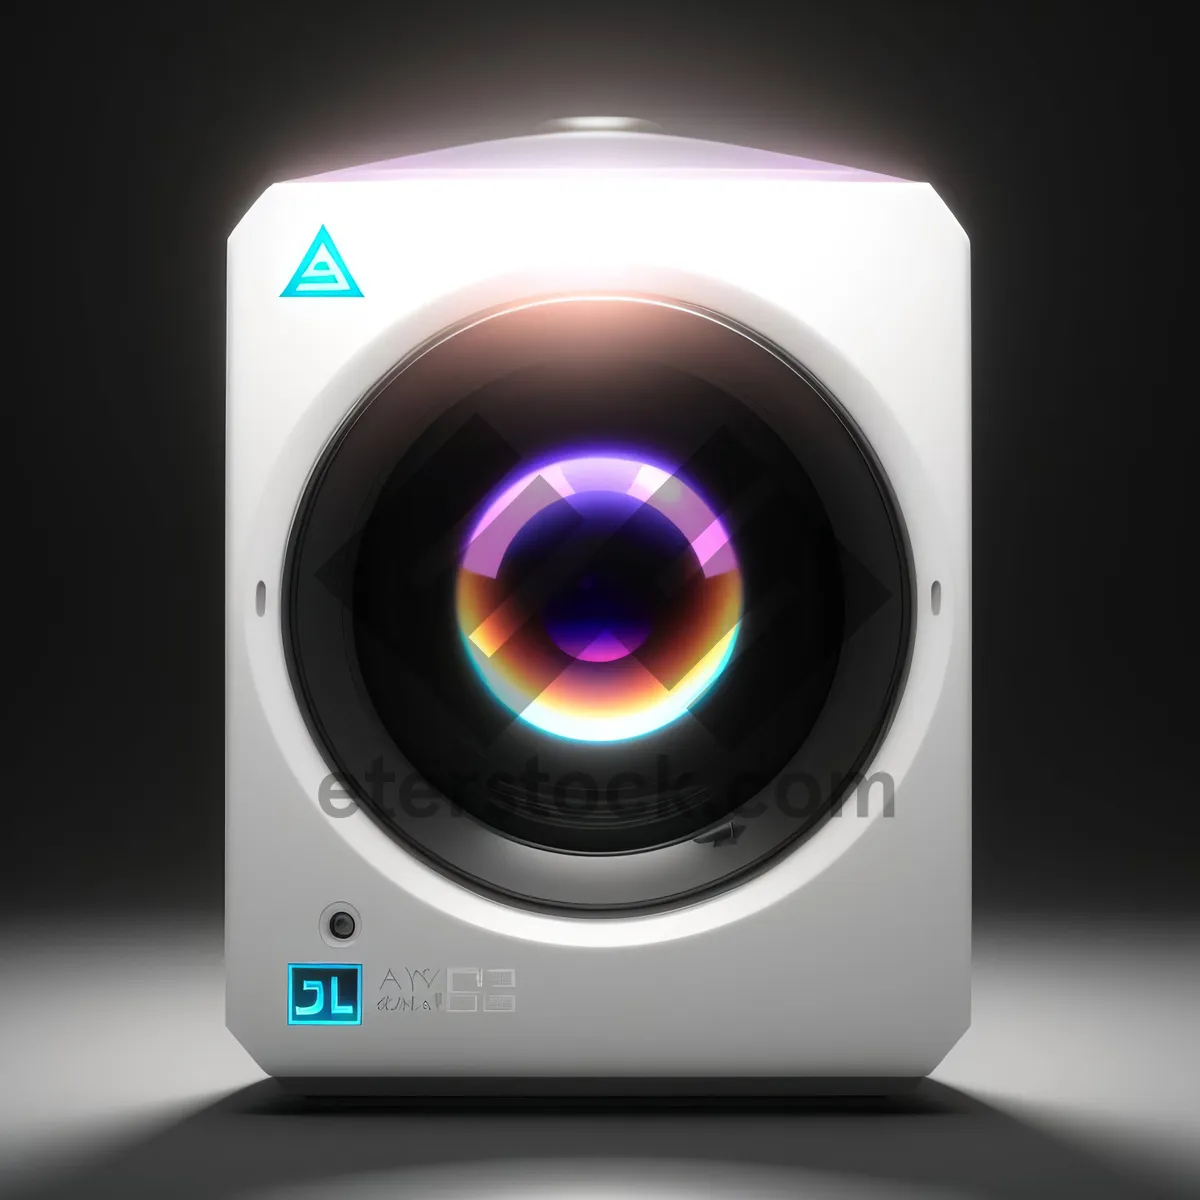 Picture of Modern Digital Audio Control: Shiny Stereo Speaker Button